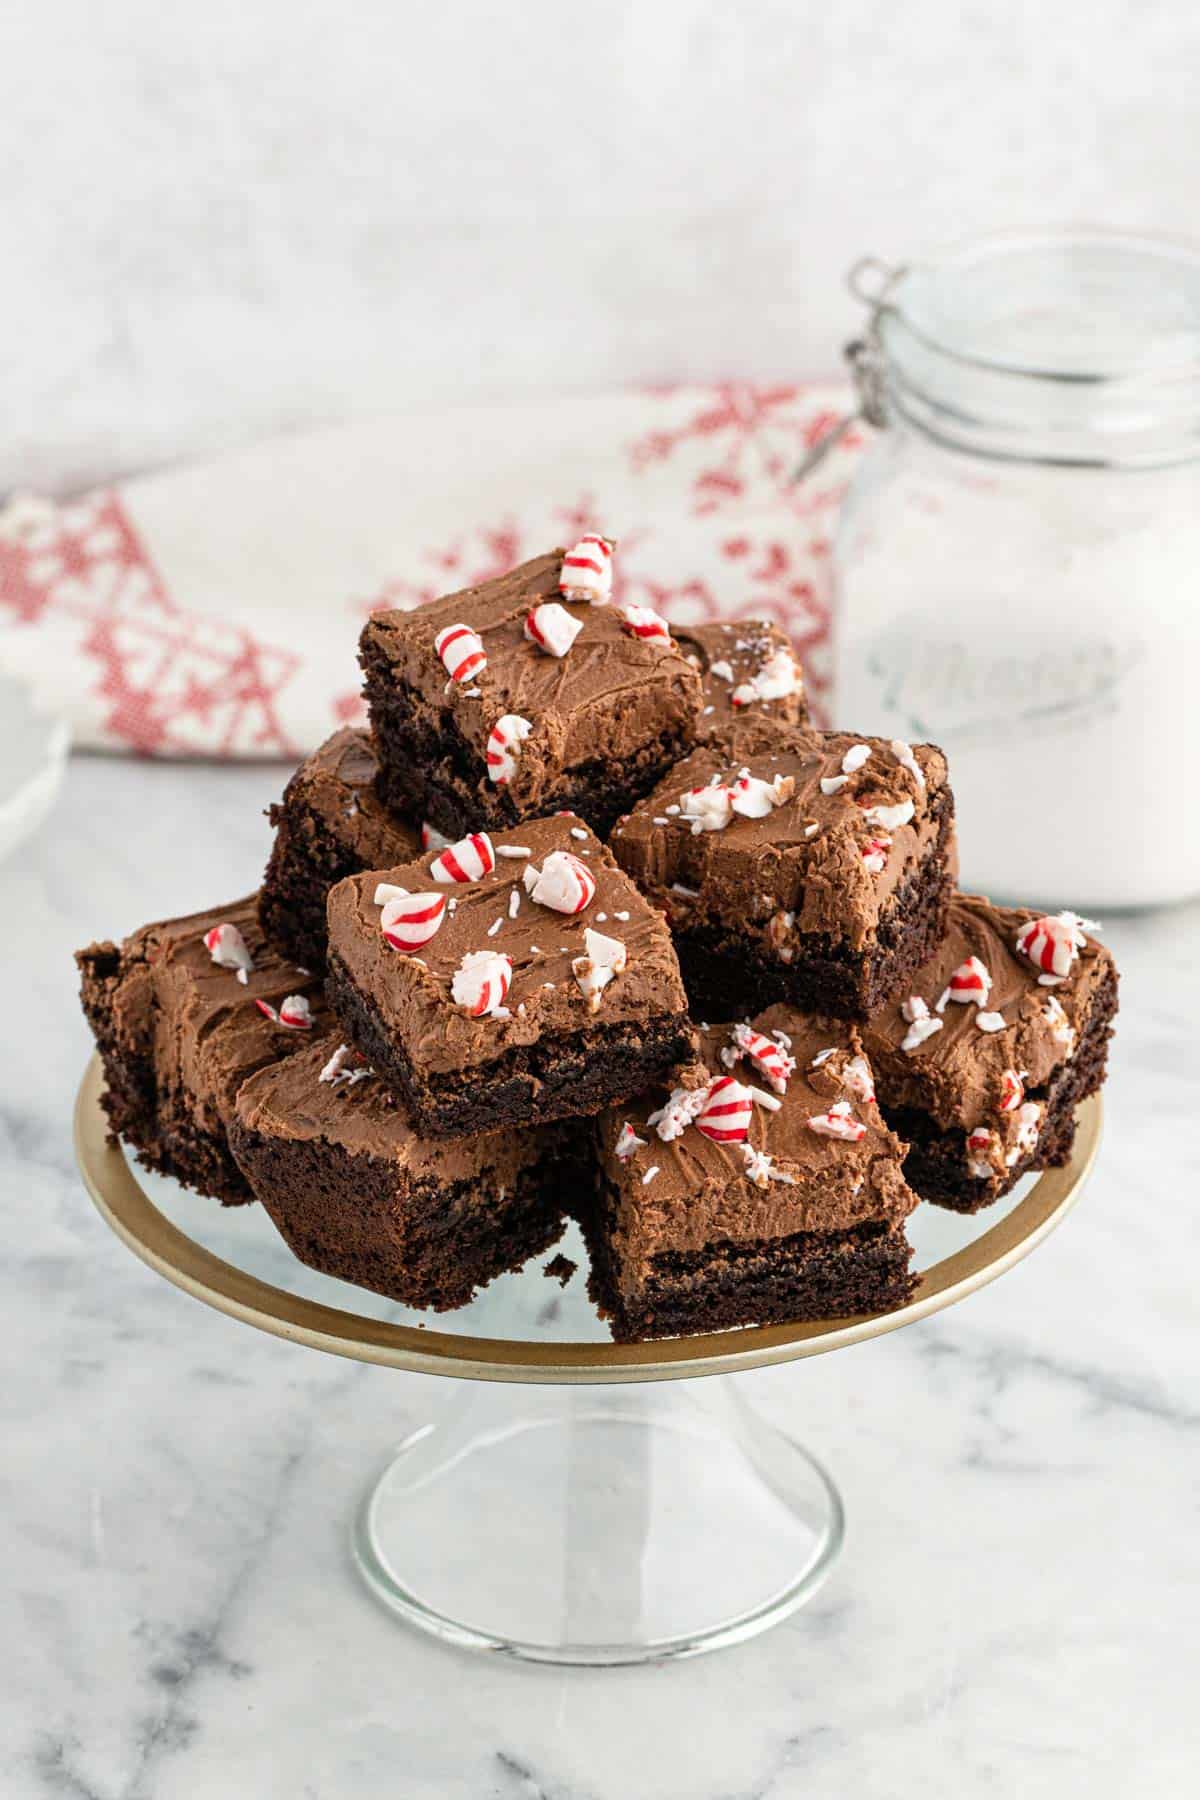 Peppermint One Bowl Brownies Peppermint Brownies 2 - Peppermint One Bowl Brownies Recipe